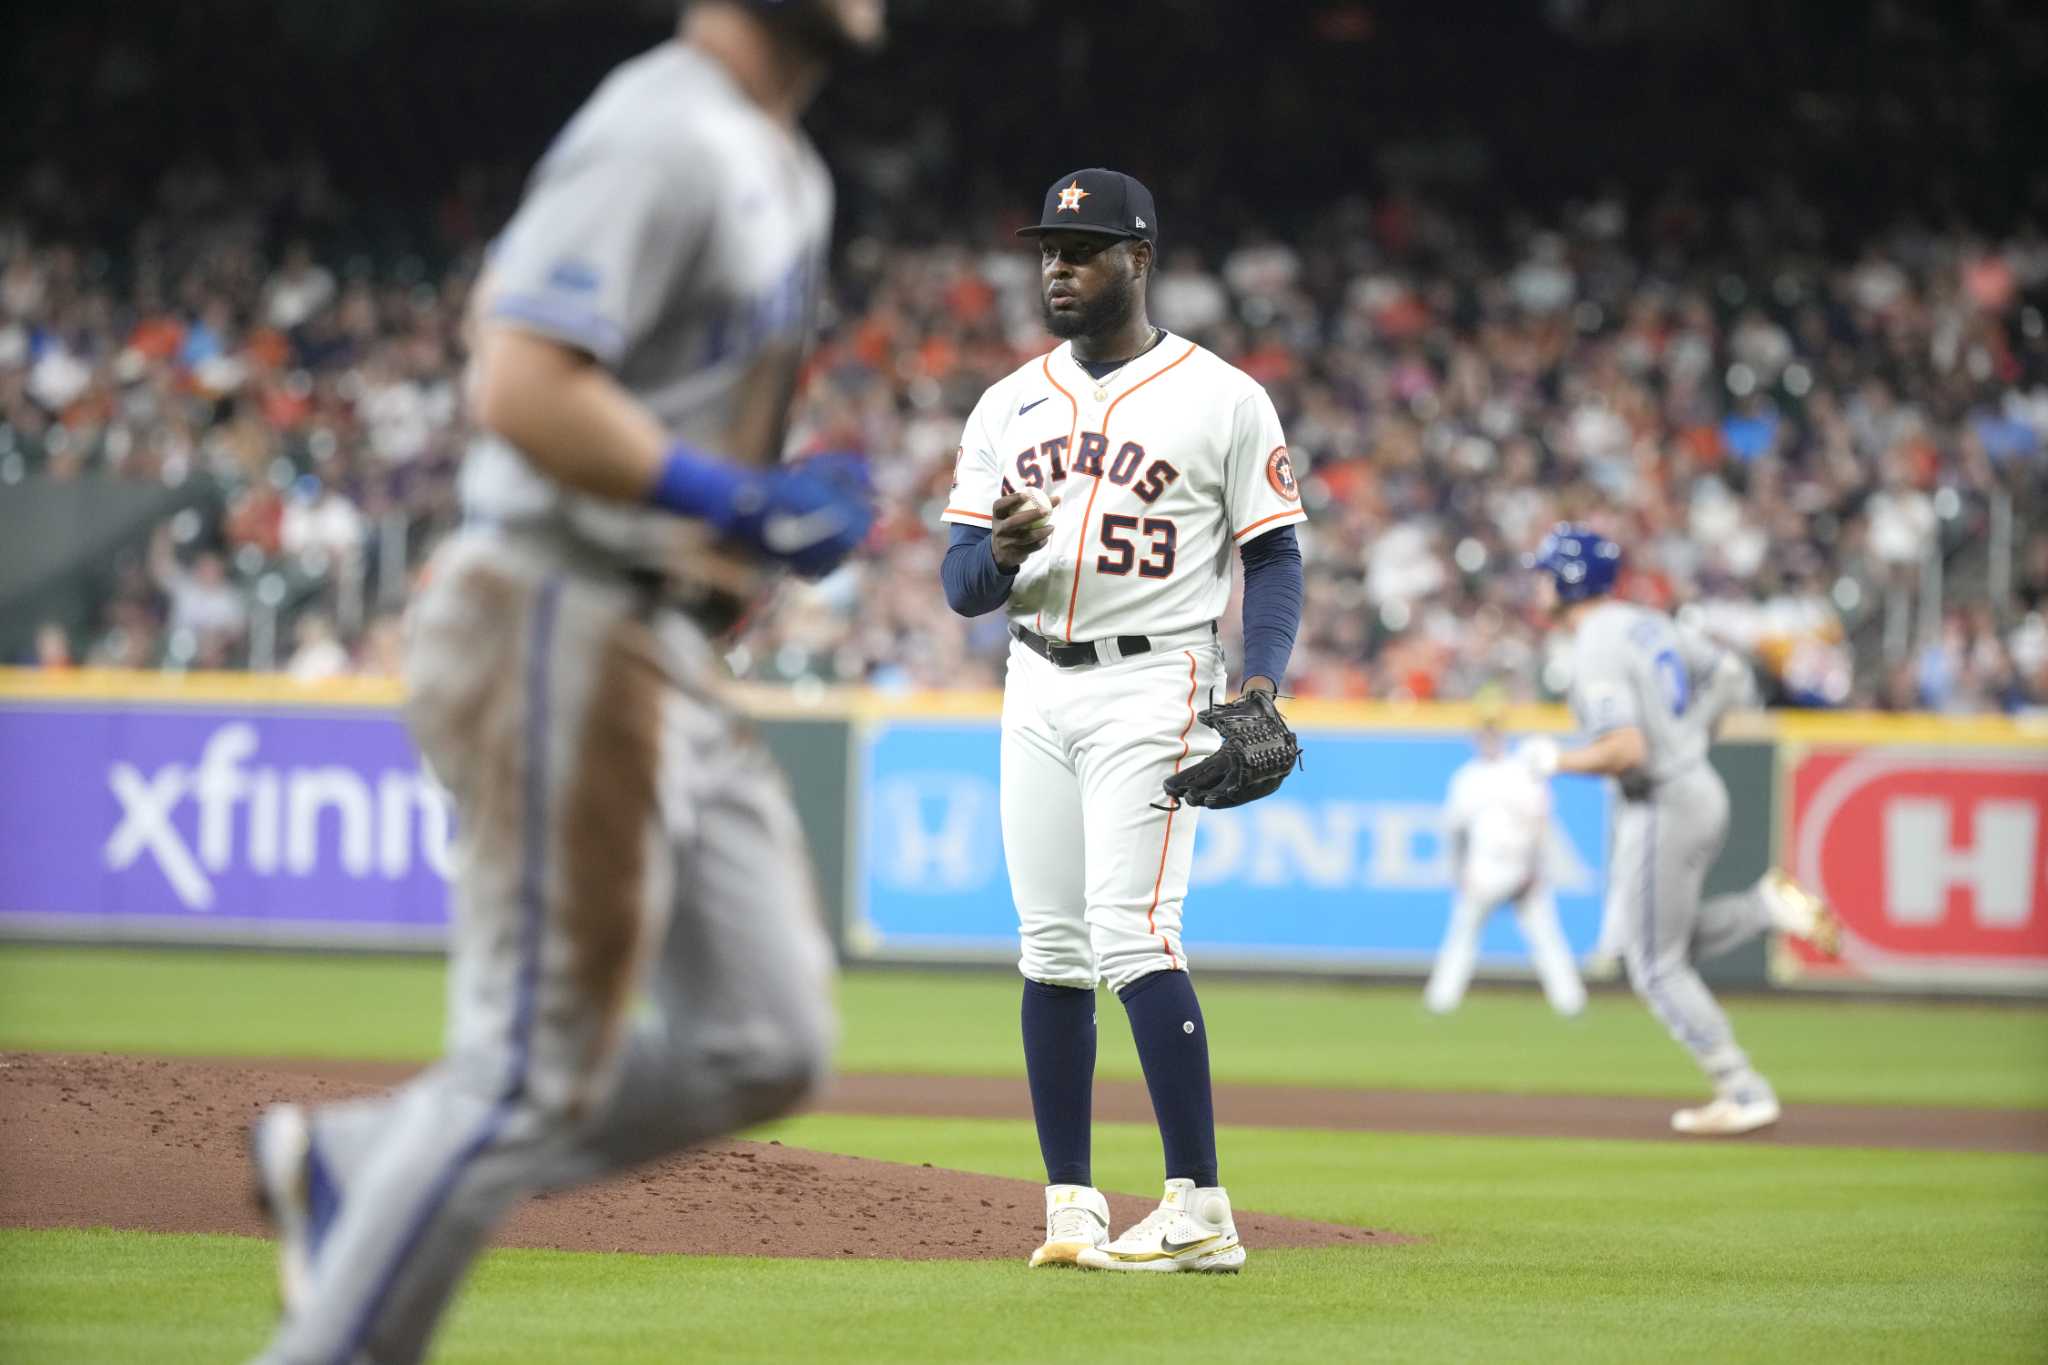 Yuli Gurriel to leave H-Town's Astros, MLB source says